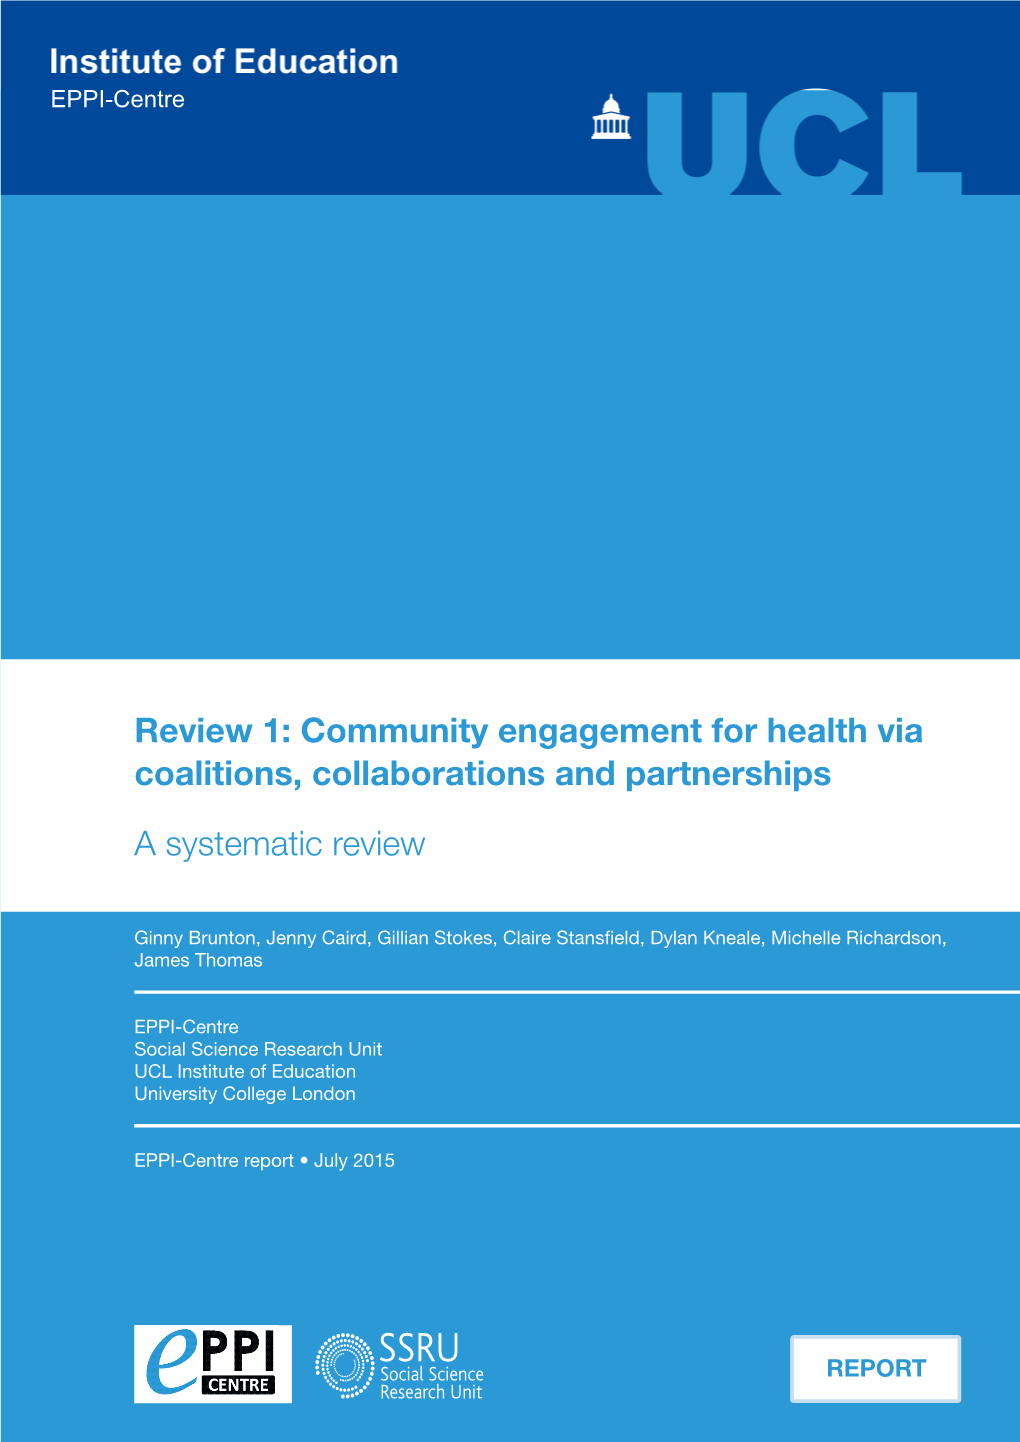 Review 1: Community Engagement for Health Via Coalitions, Collaborations and Partnerships